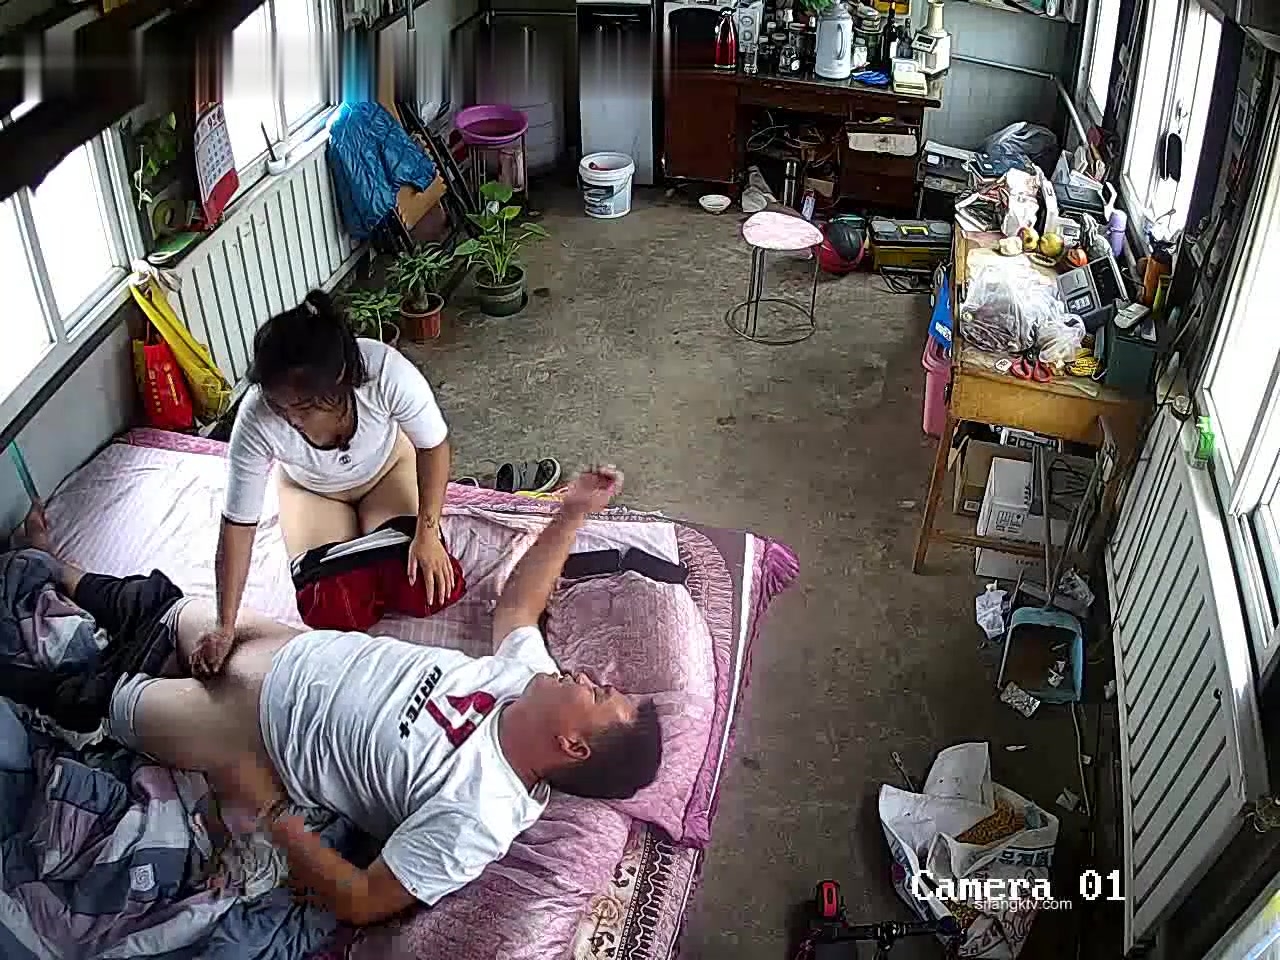 Surveillance cracked secretly filming middle-aged couples napping while the children are not at home to catch a shot.